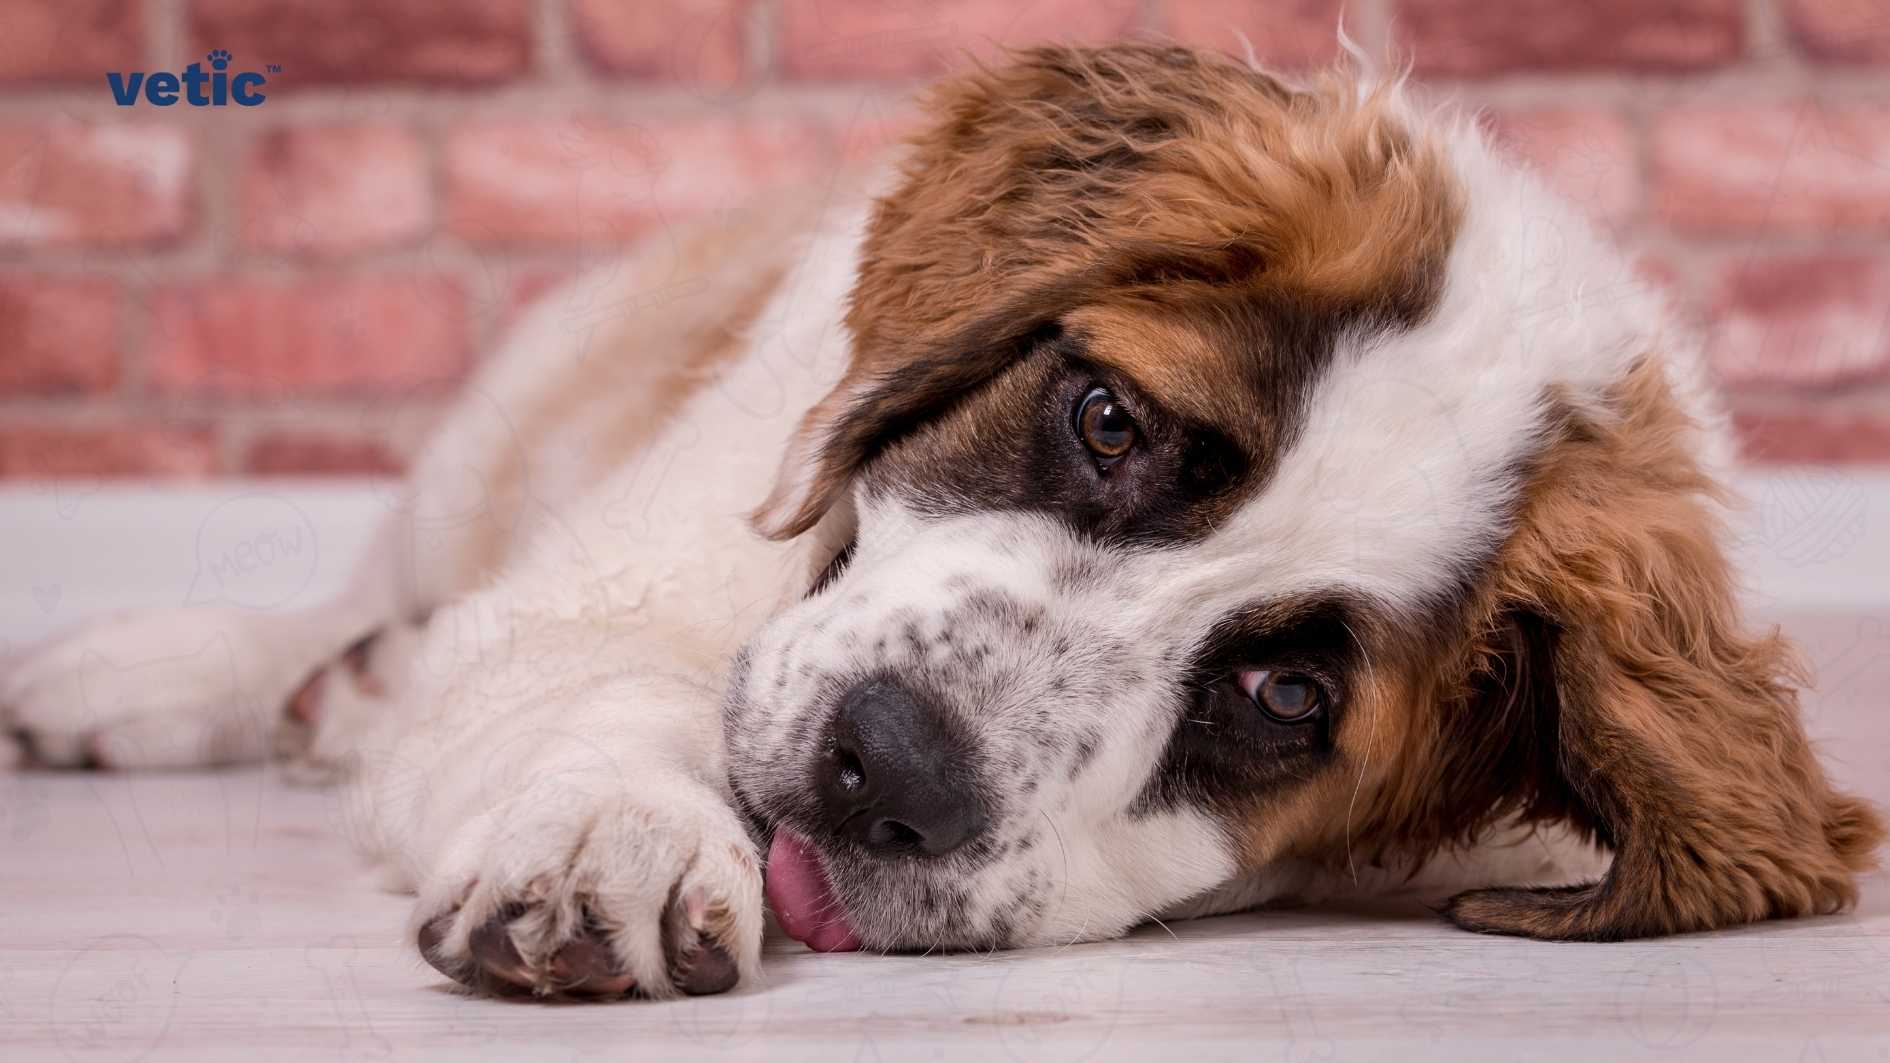 A Saint Bernard dog lying on the floor with its body partially blurred, against a backdrop of a brick wall, with the word ‘vetic’ visible in the top left corner.